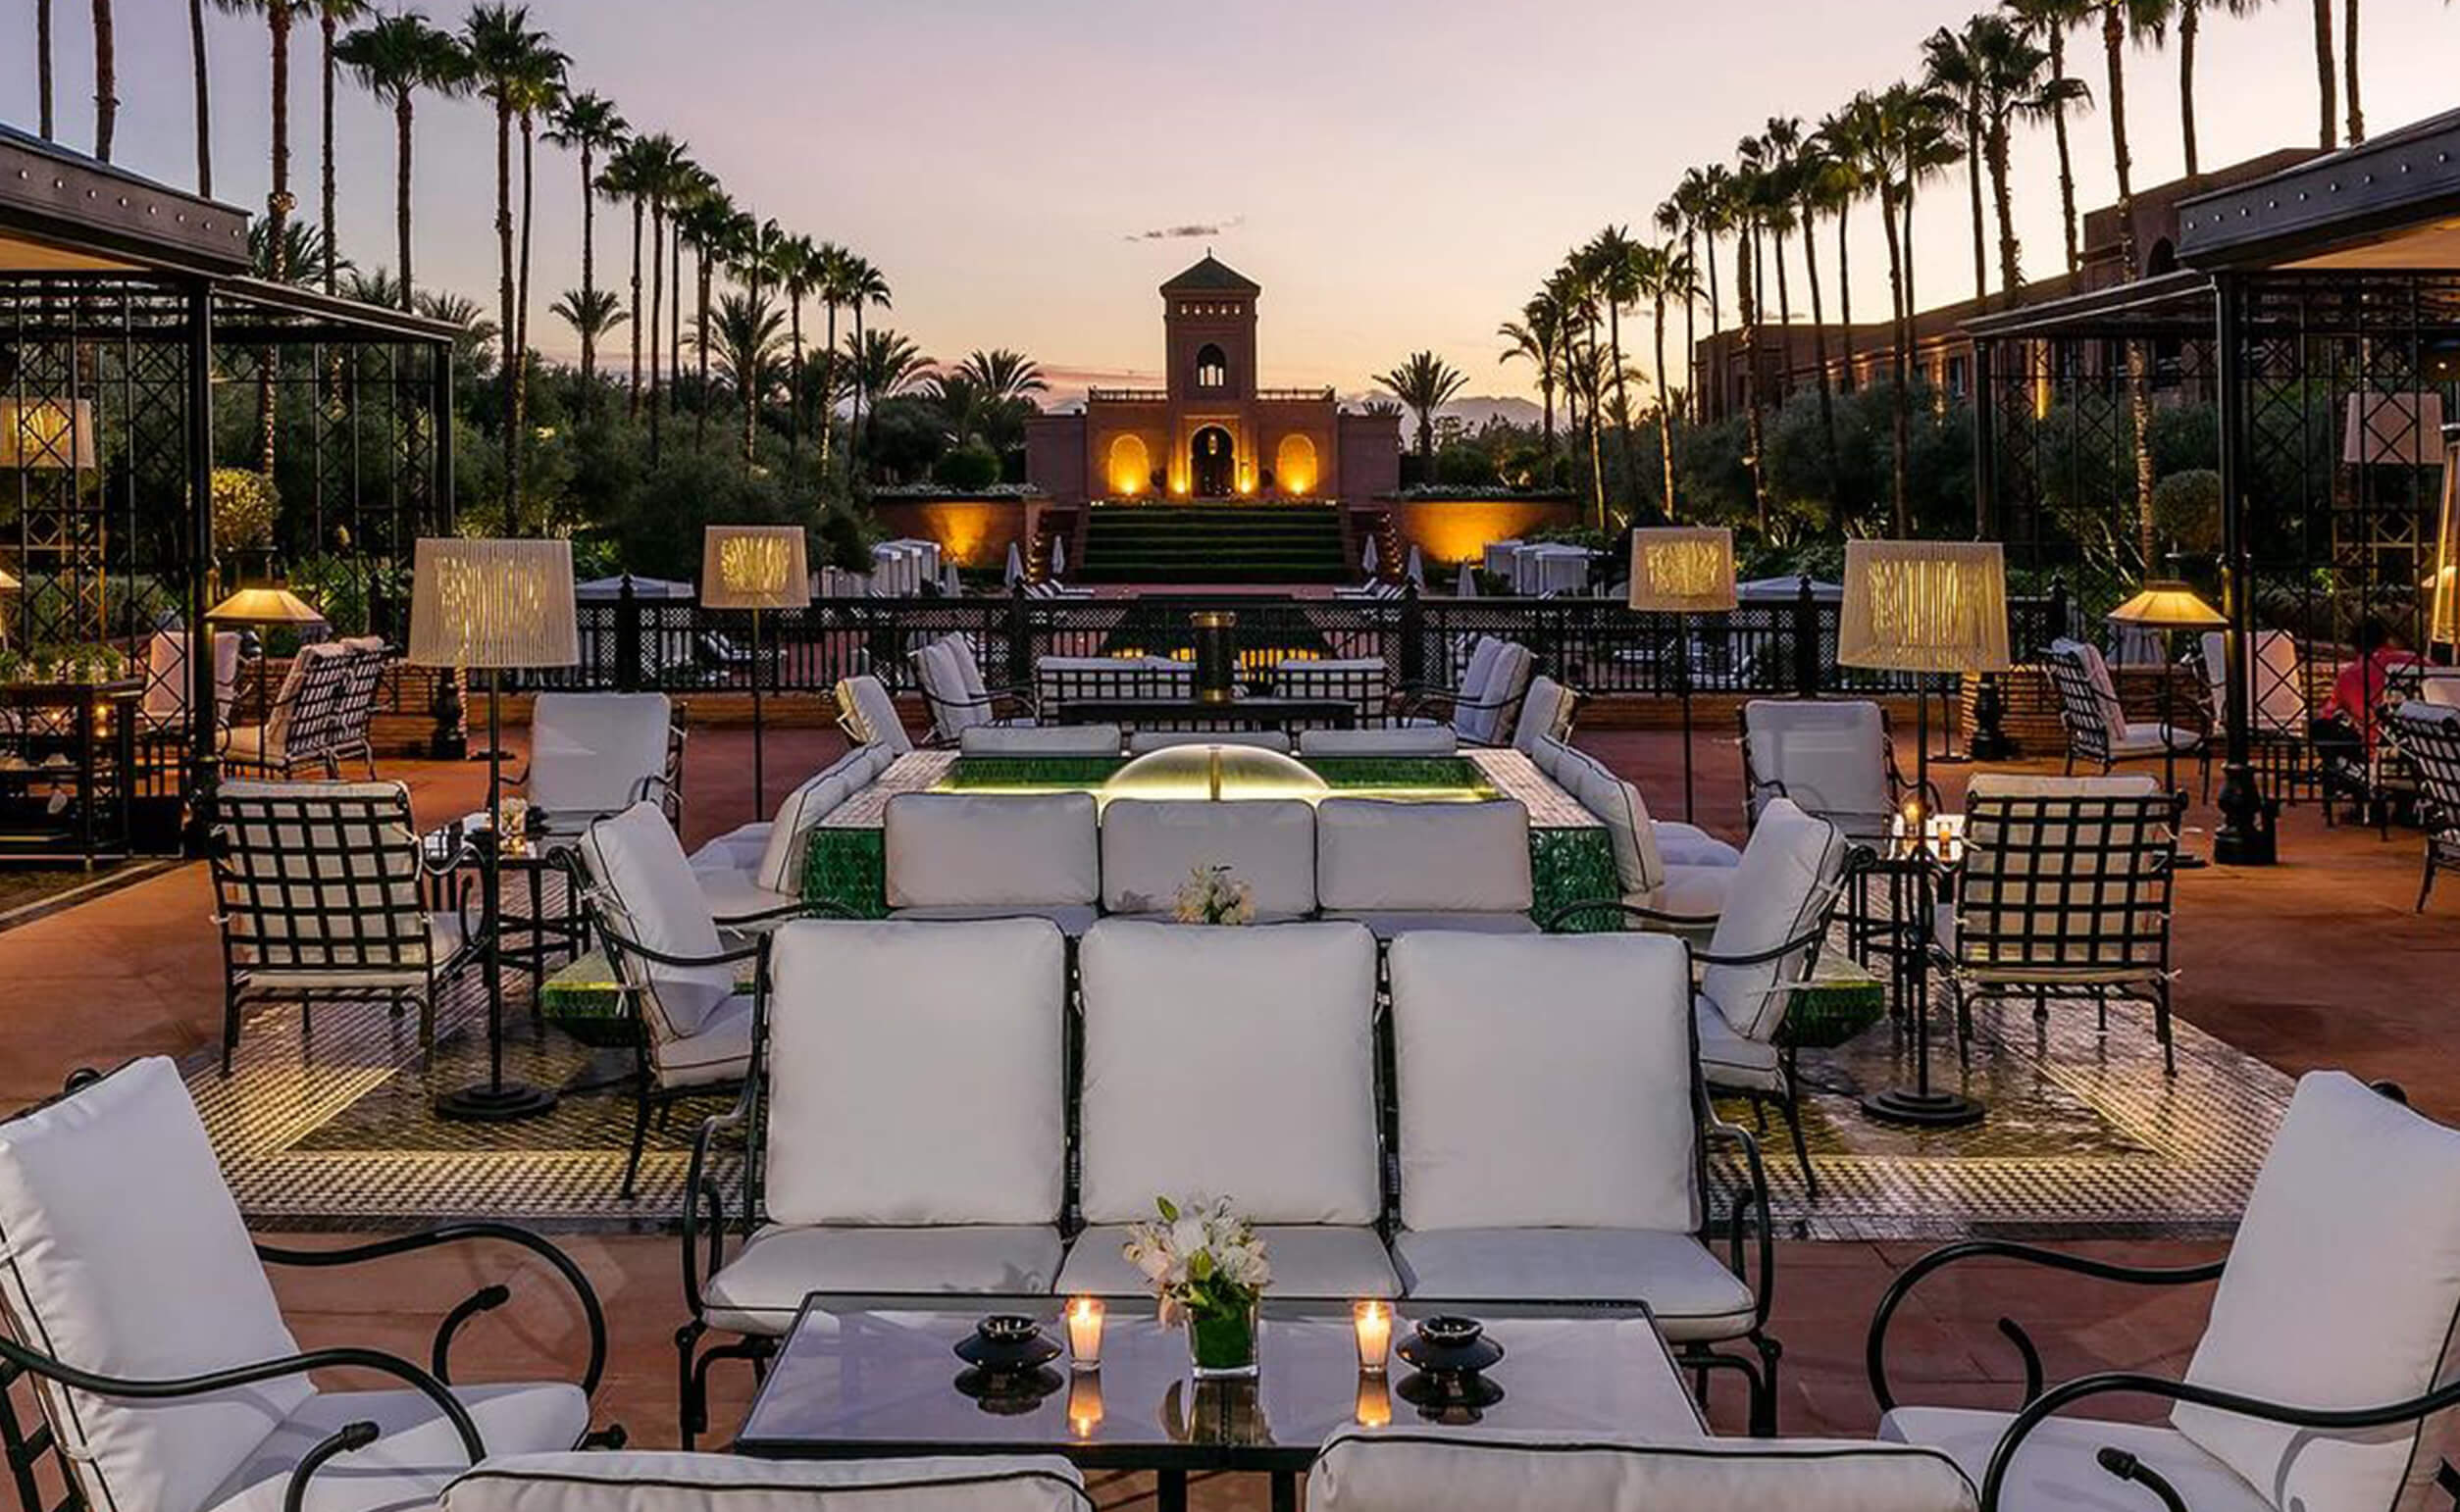 The magic of Marrakesh with our enchanting accommodations, fine dining, and breathtaking amenities.